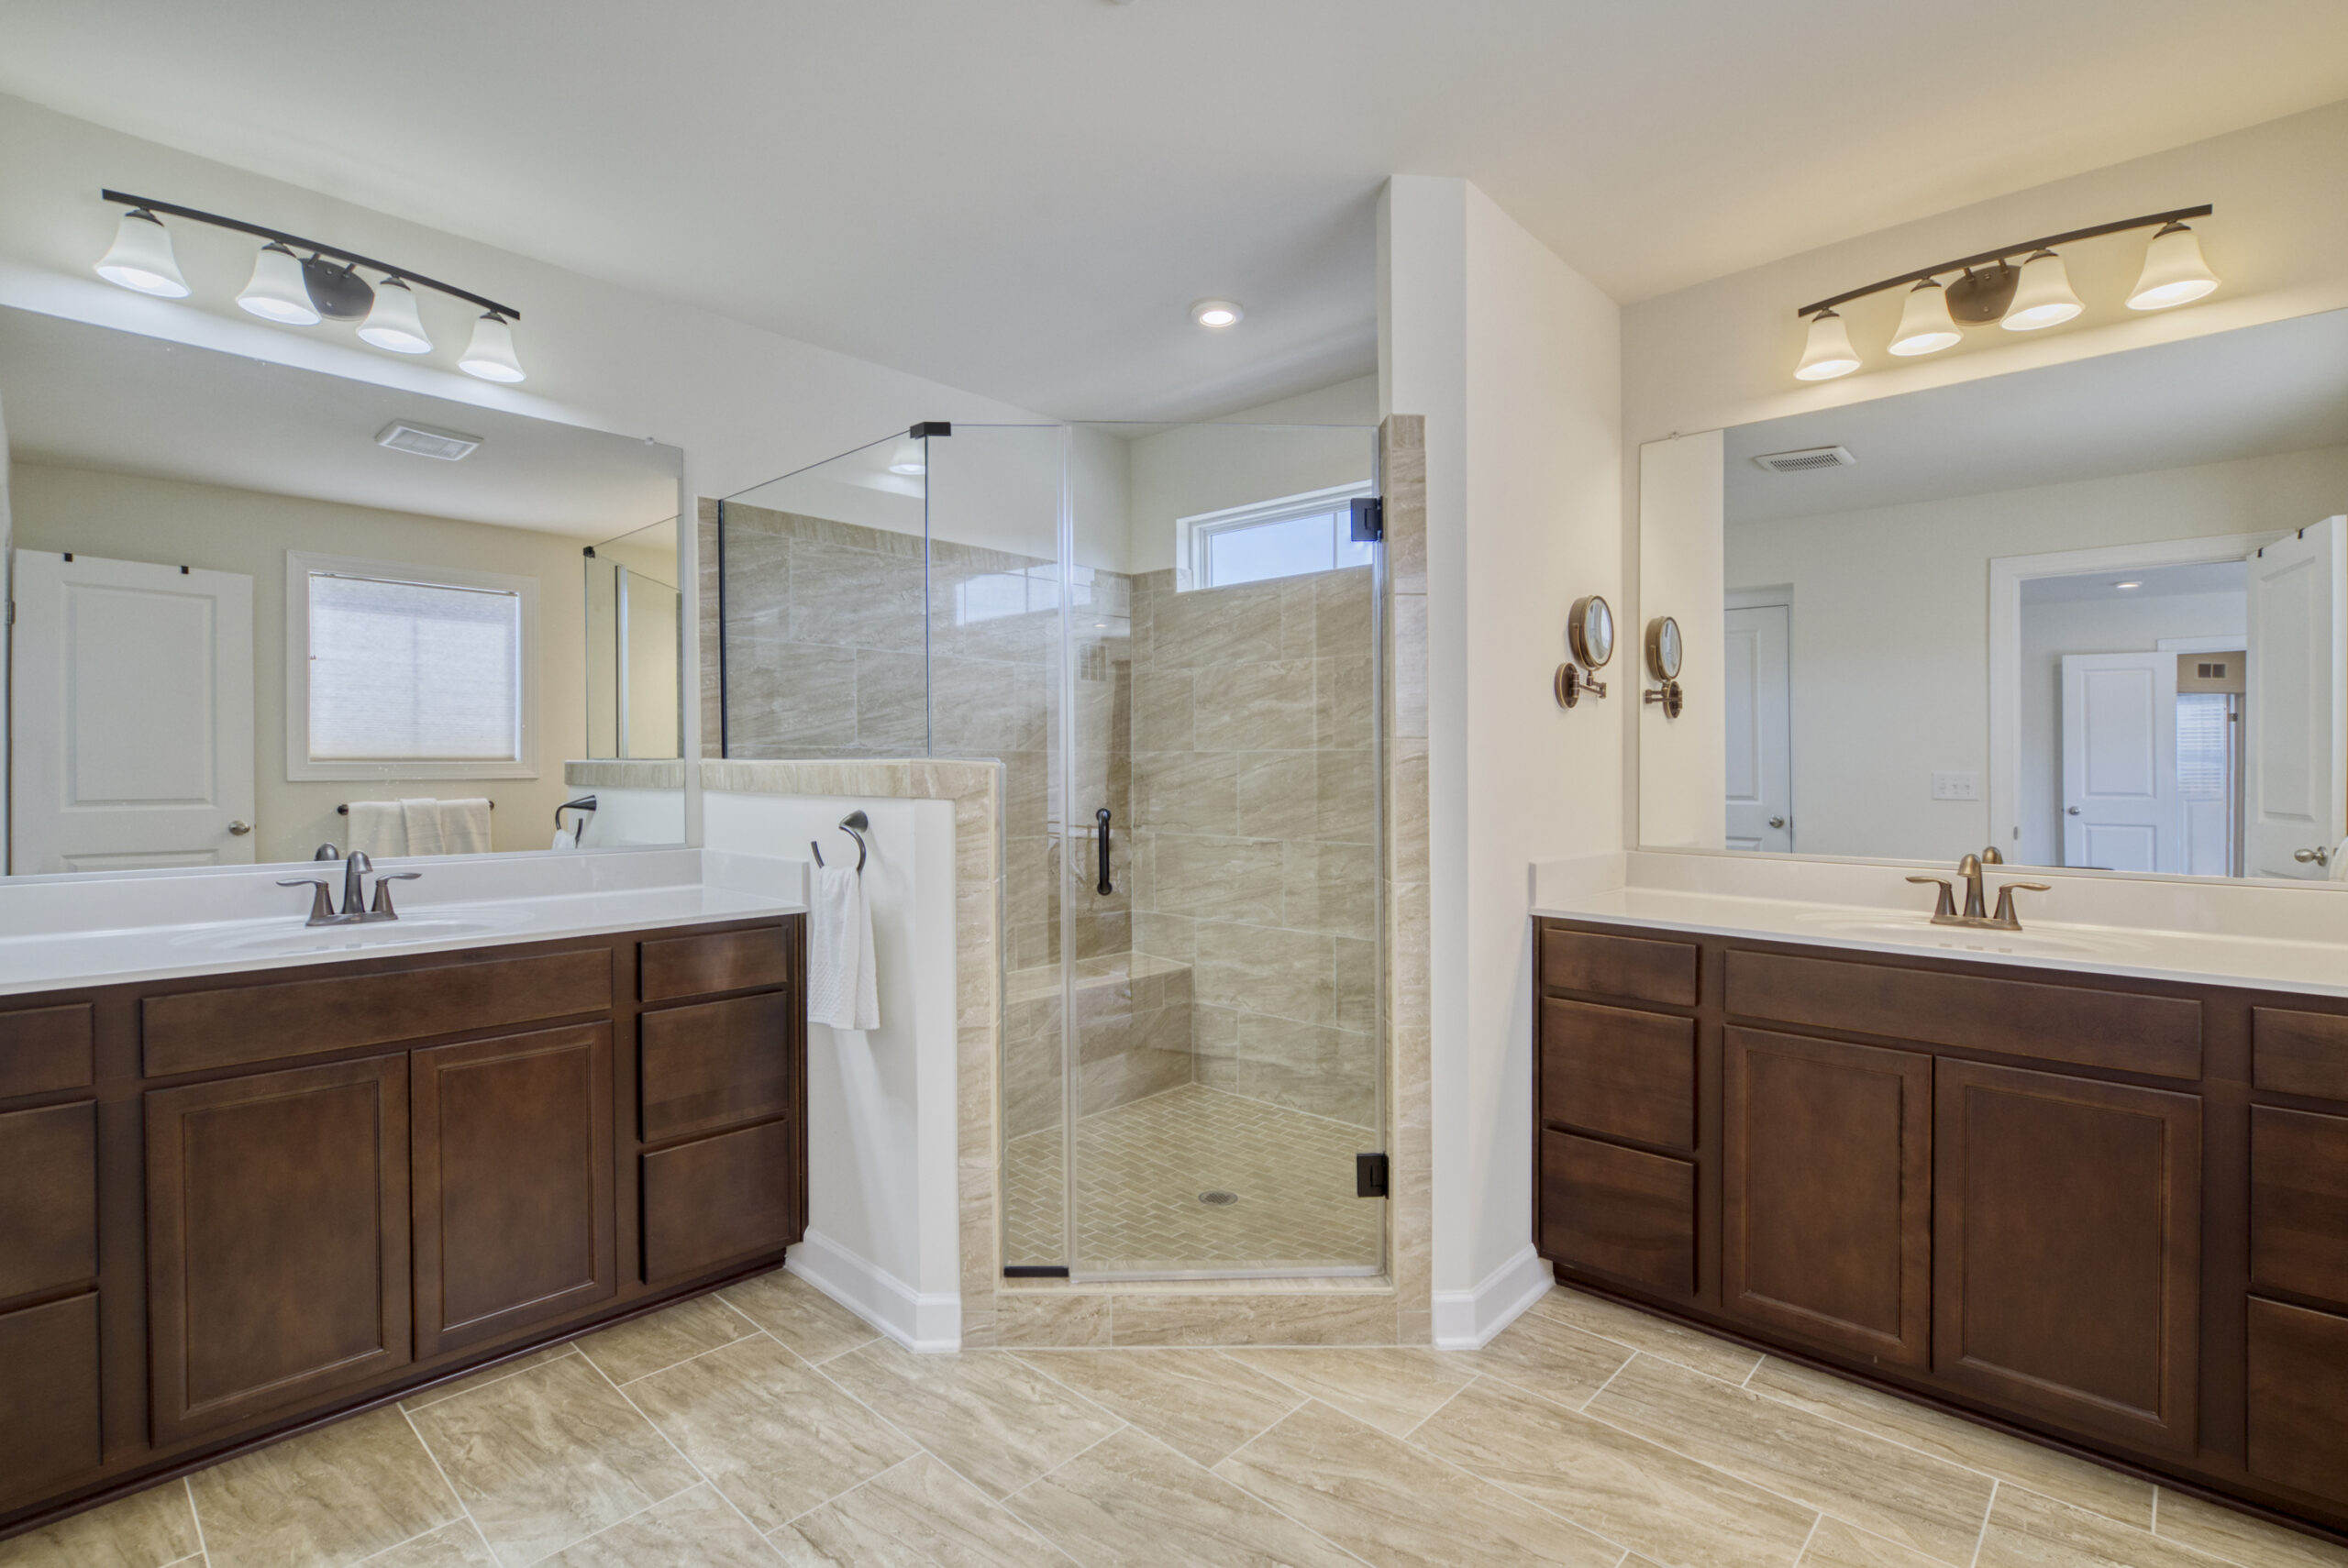 Professional interior photo of 8109 Zoe Place, Alexandria, VA - Showing the primary bathroom with large shower with shower bench